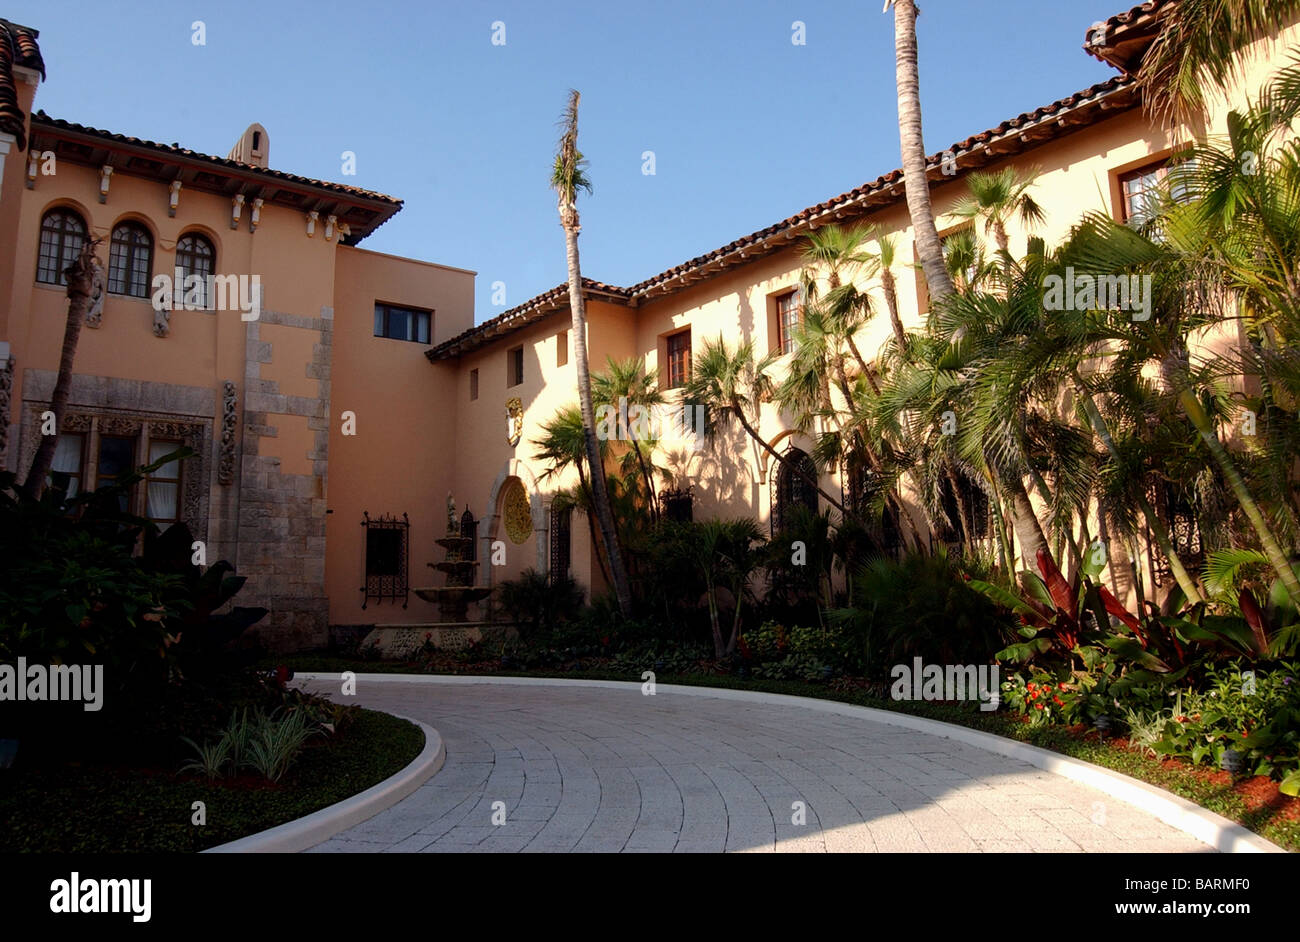 Views of Mar a lago estate owned by Donald Trump in Palm Beach Stock Photo